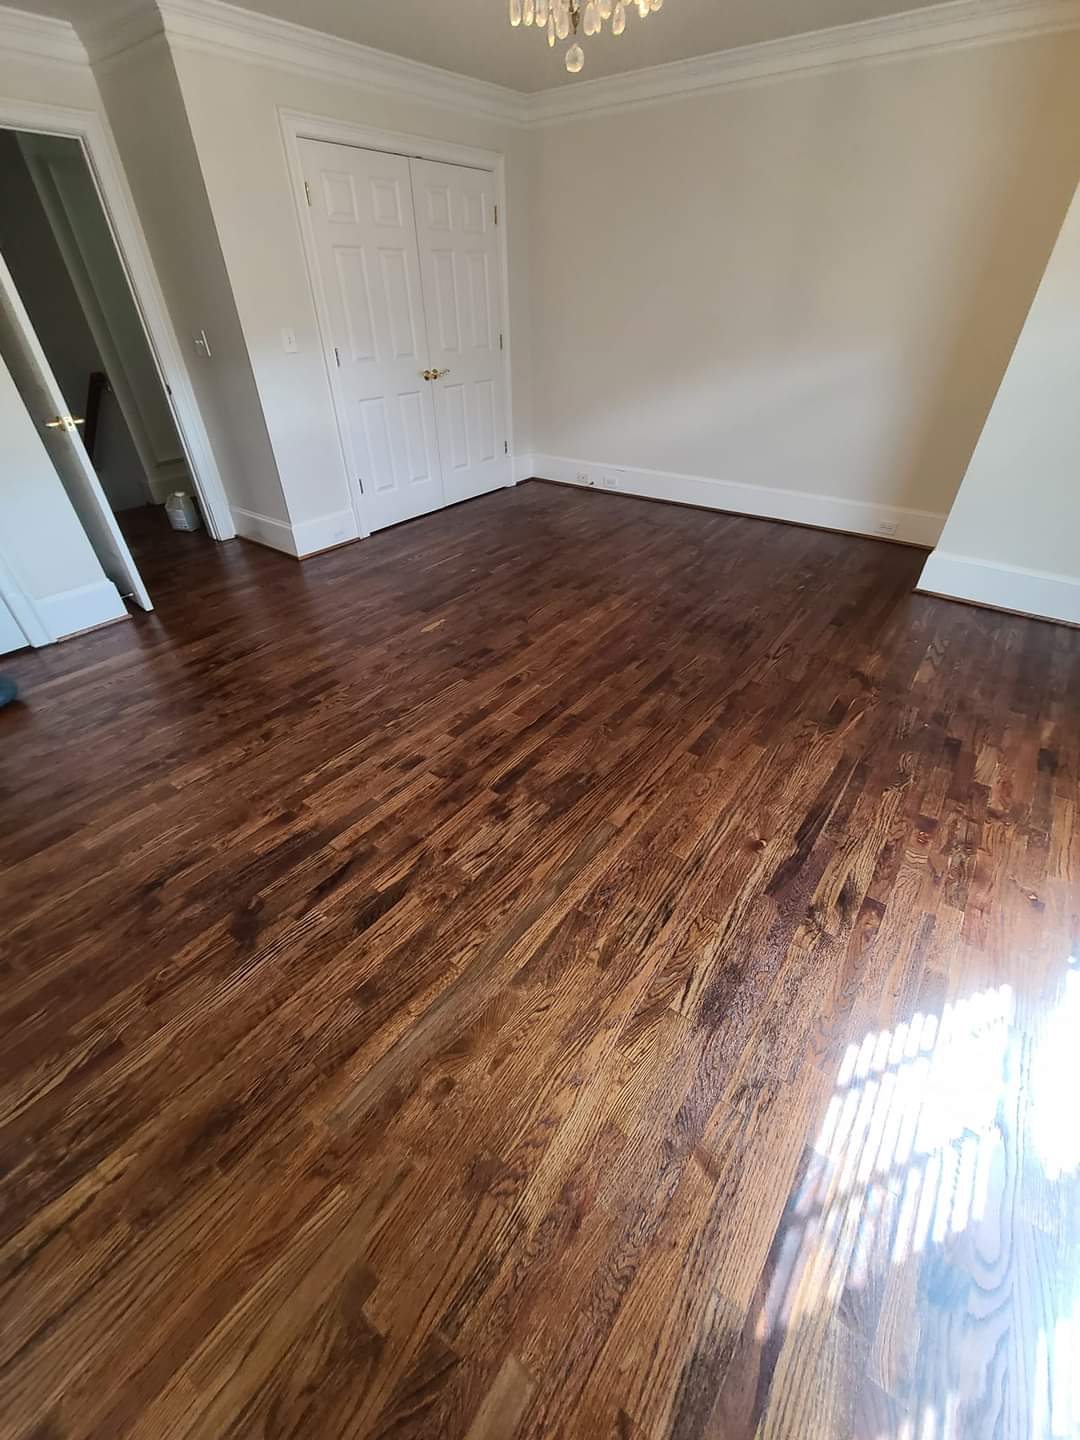 A beautiful shine on this freshly installed wood floor brings the room together.